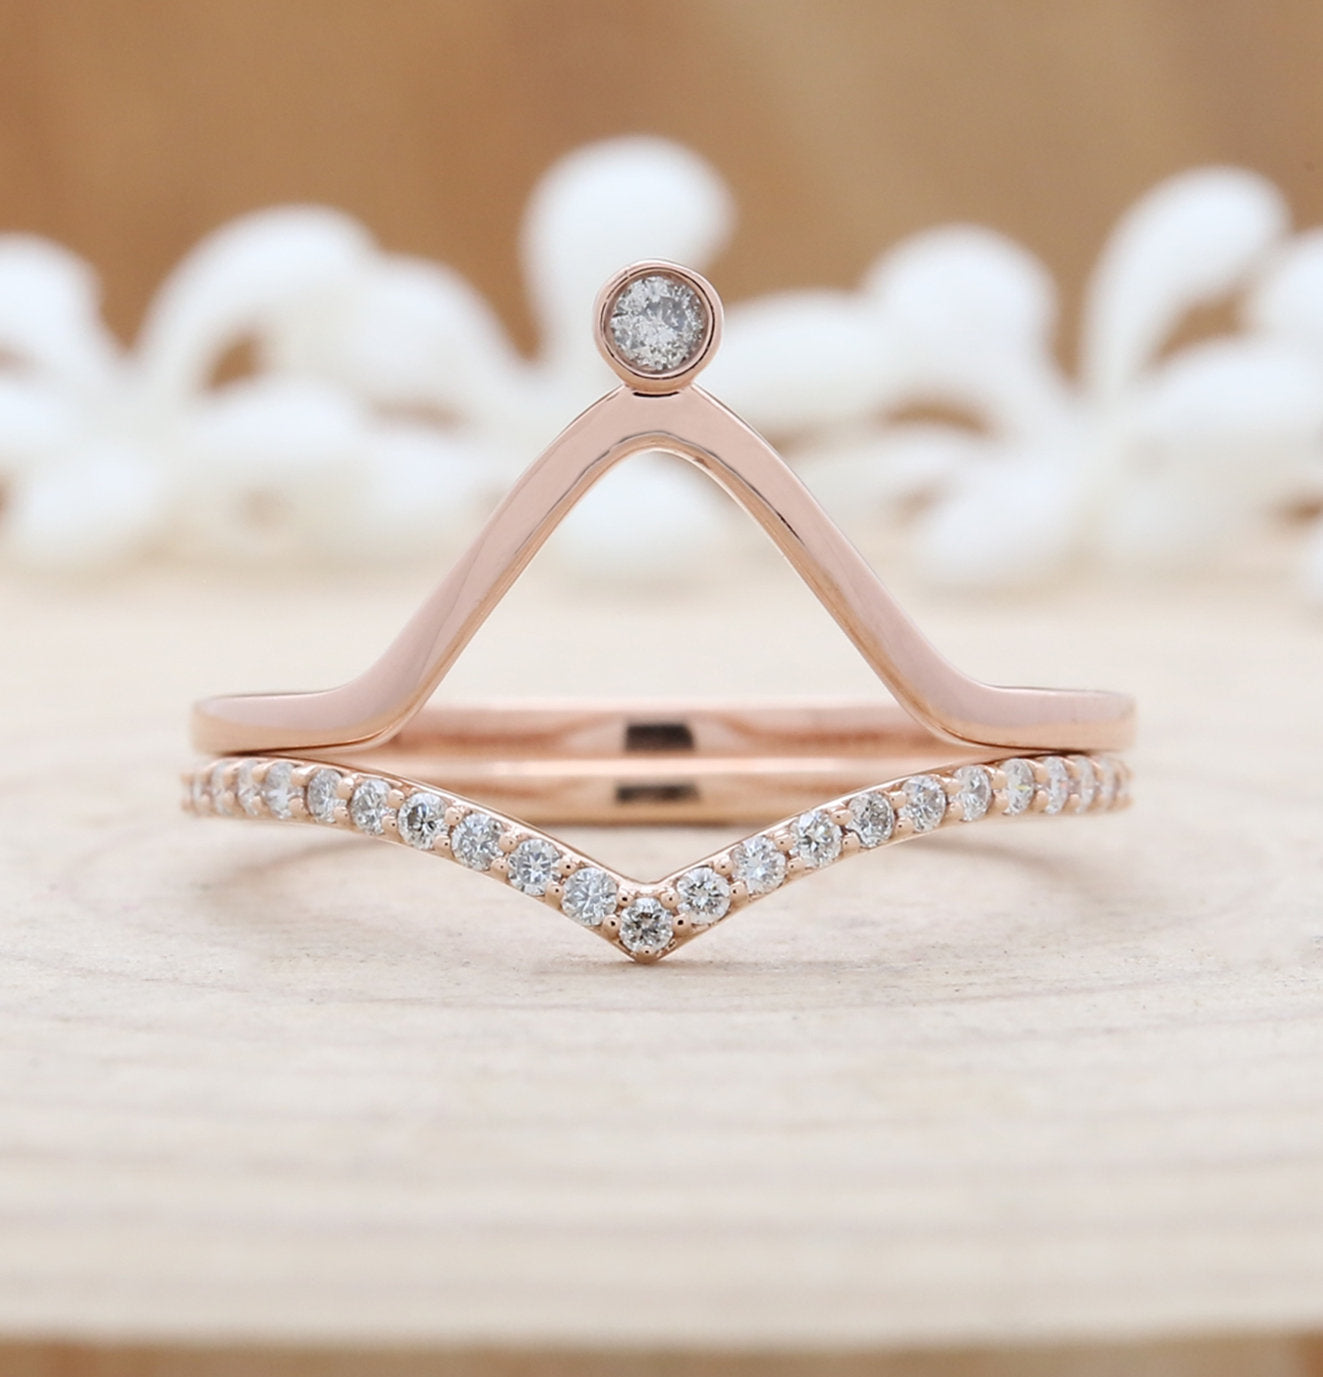 Salt And Pepper Round Diamond 14K Rose Gold Ring Band Engagement Wedding Gift Band Ring KD620